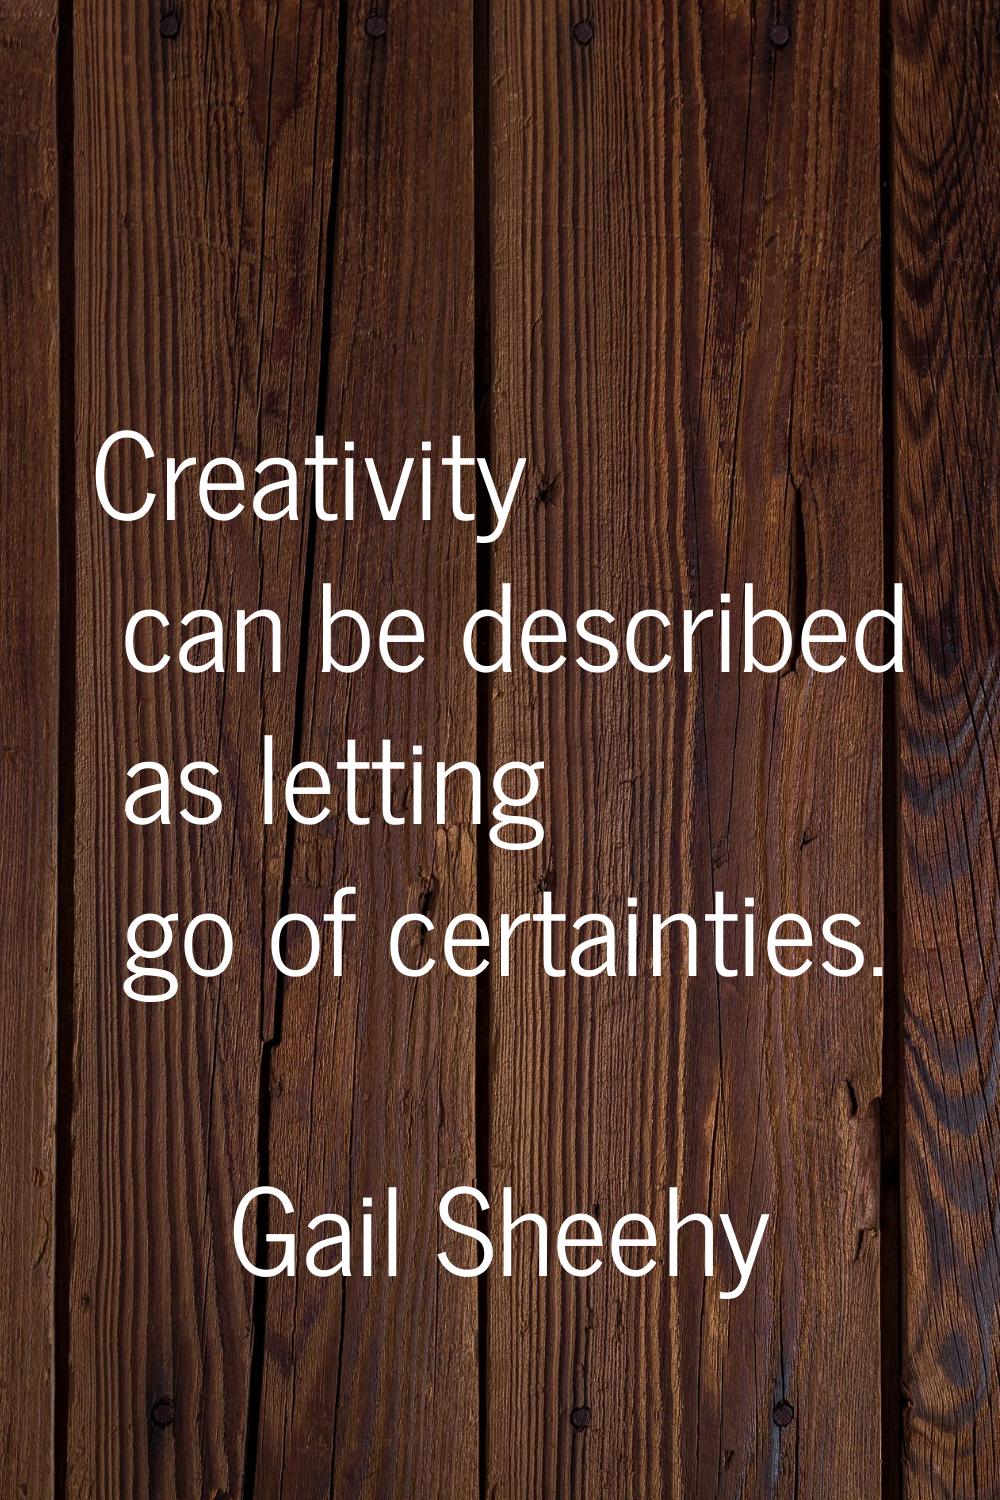 Creativity can be described as letting go of certainties.